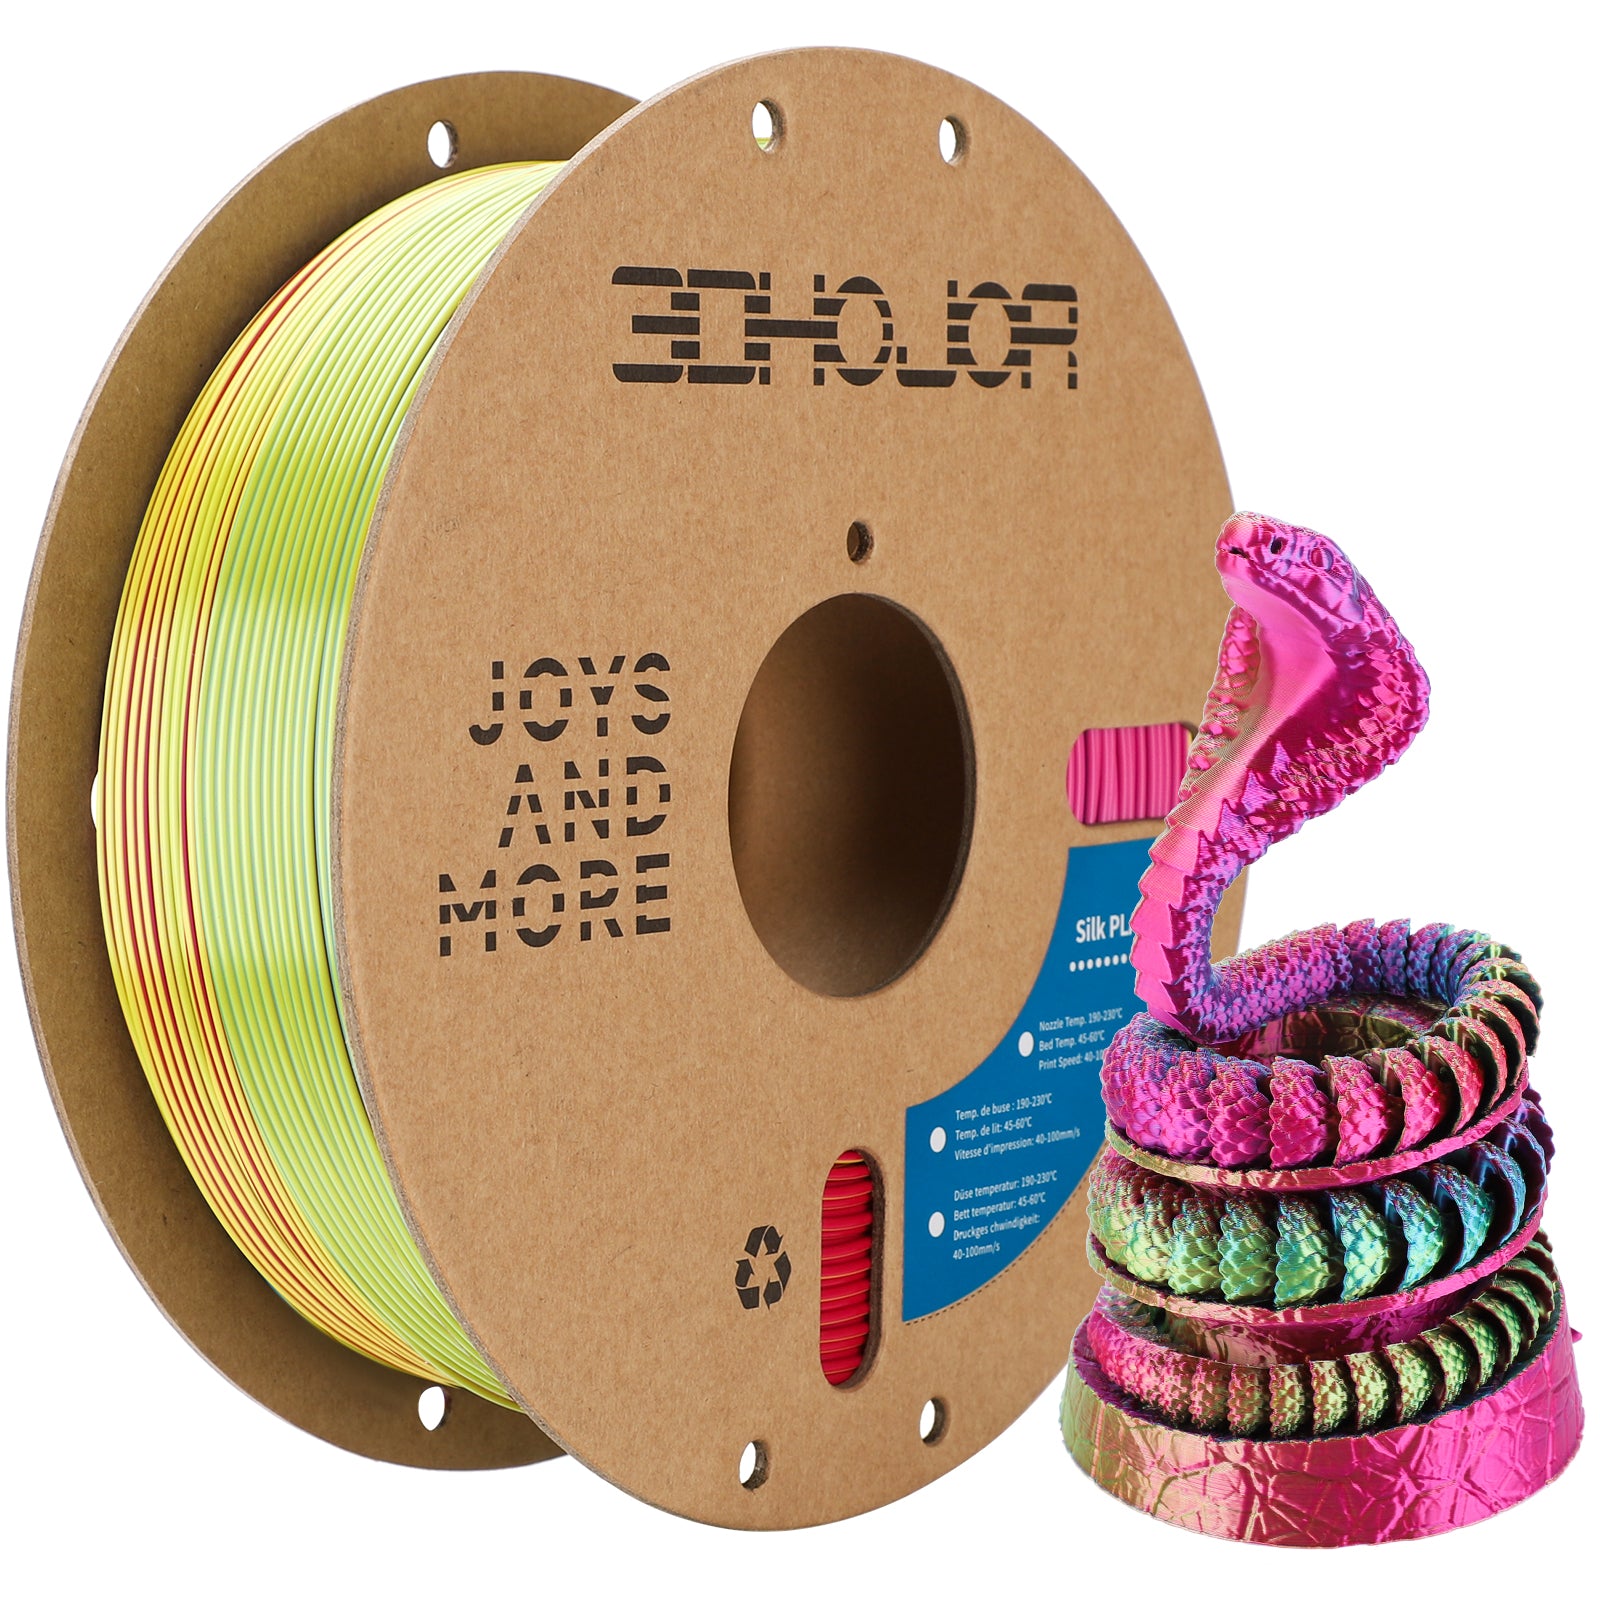 Silk PLA Filament 1.75mm Red Yellow Blue Triple Color PLA 3D Printer Filament 3 in 1 Coextrusion 1KG Spool(2.2lbs) 3D Printing Filament Dimensional Accuracy /- 0.03mm